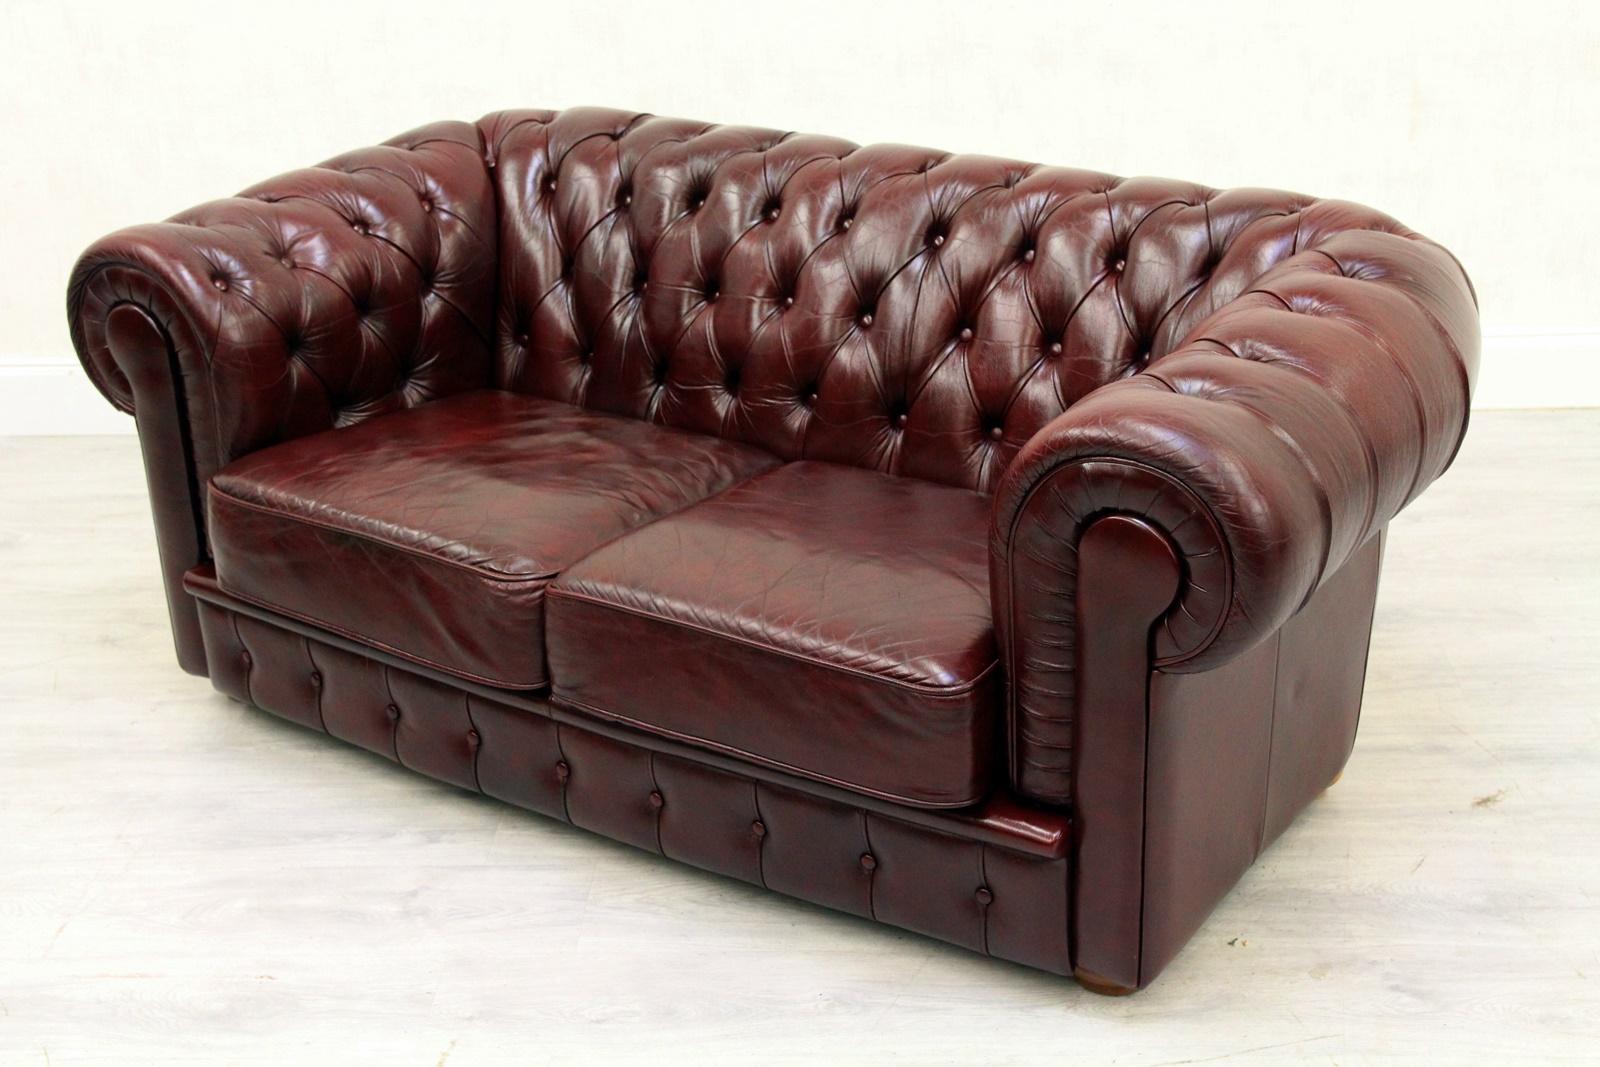 Late 20th Century Chesterfield English Sofa Leather Antique Vintage Couch Chippendale For Sale